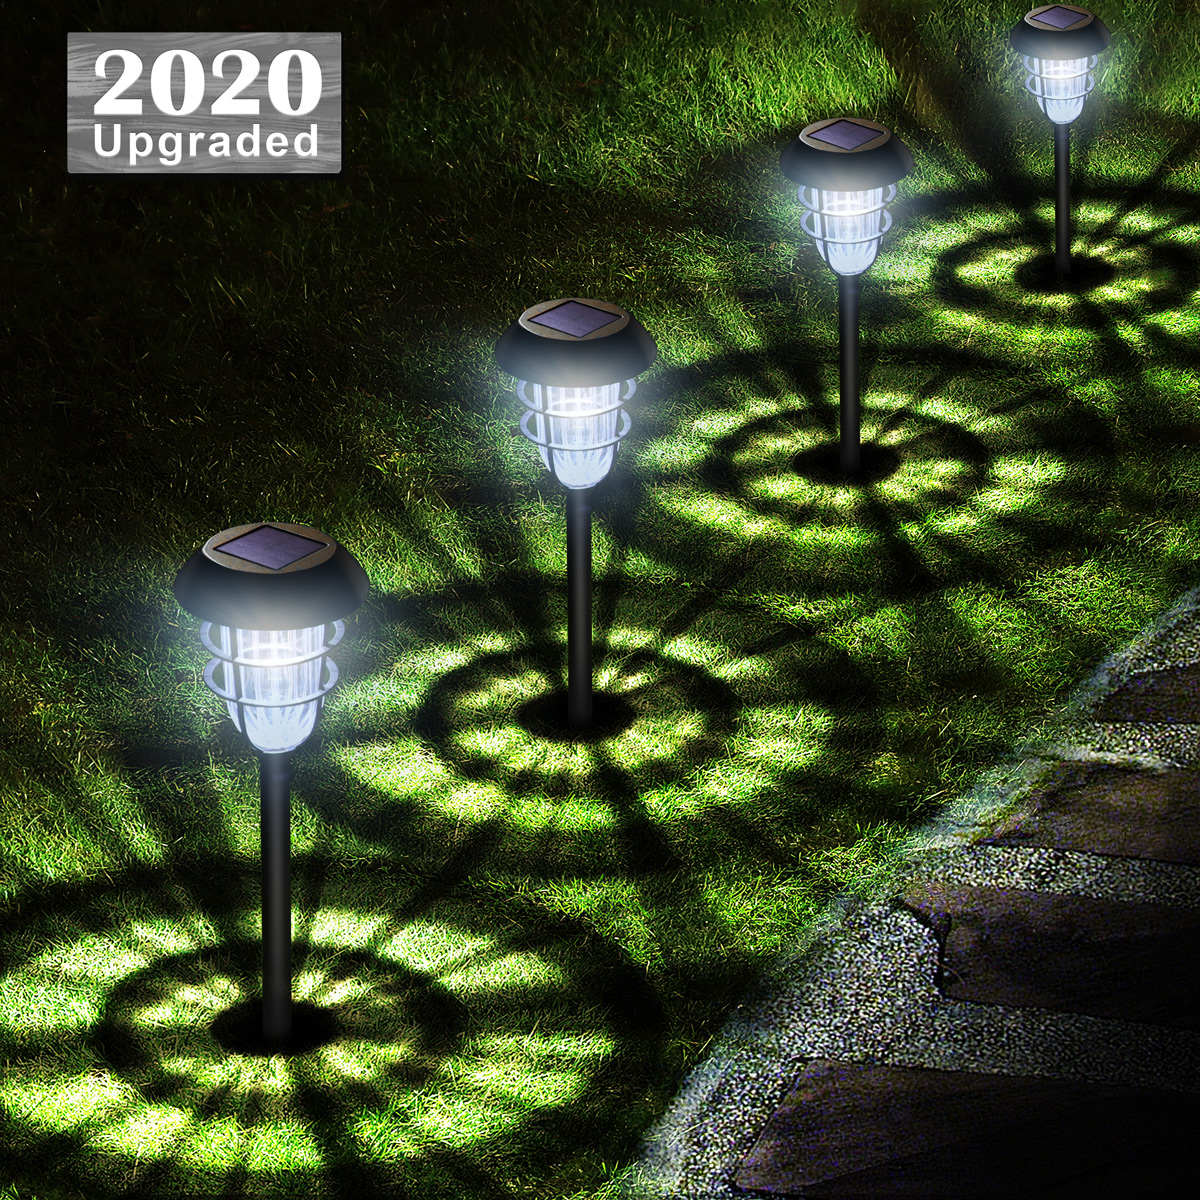 URPOWER Solar Lights Outdoor Upgraded Bright Metal Solar Pathway Lights Waterproof Auto On / Off Garden Lights Solar Powered Solar Landscape Lights for Lawn Yard Patio Path Driveway Cool White(4 Pack)